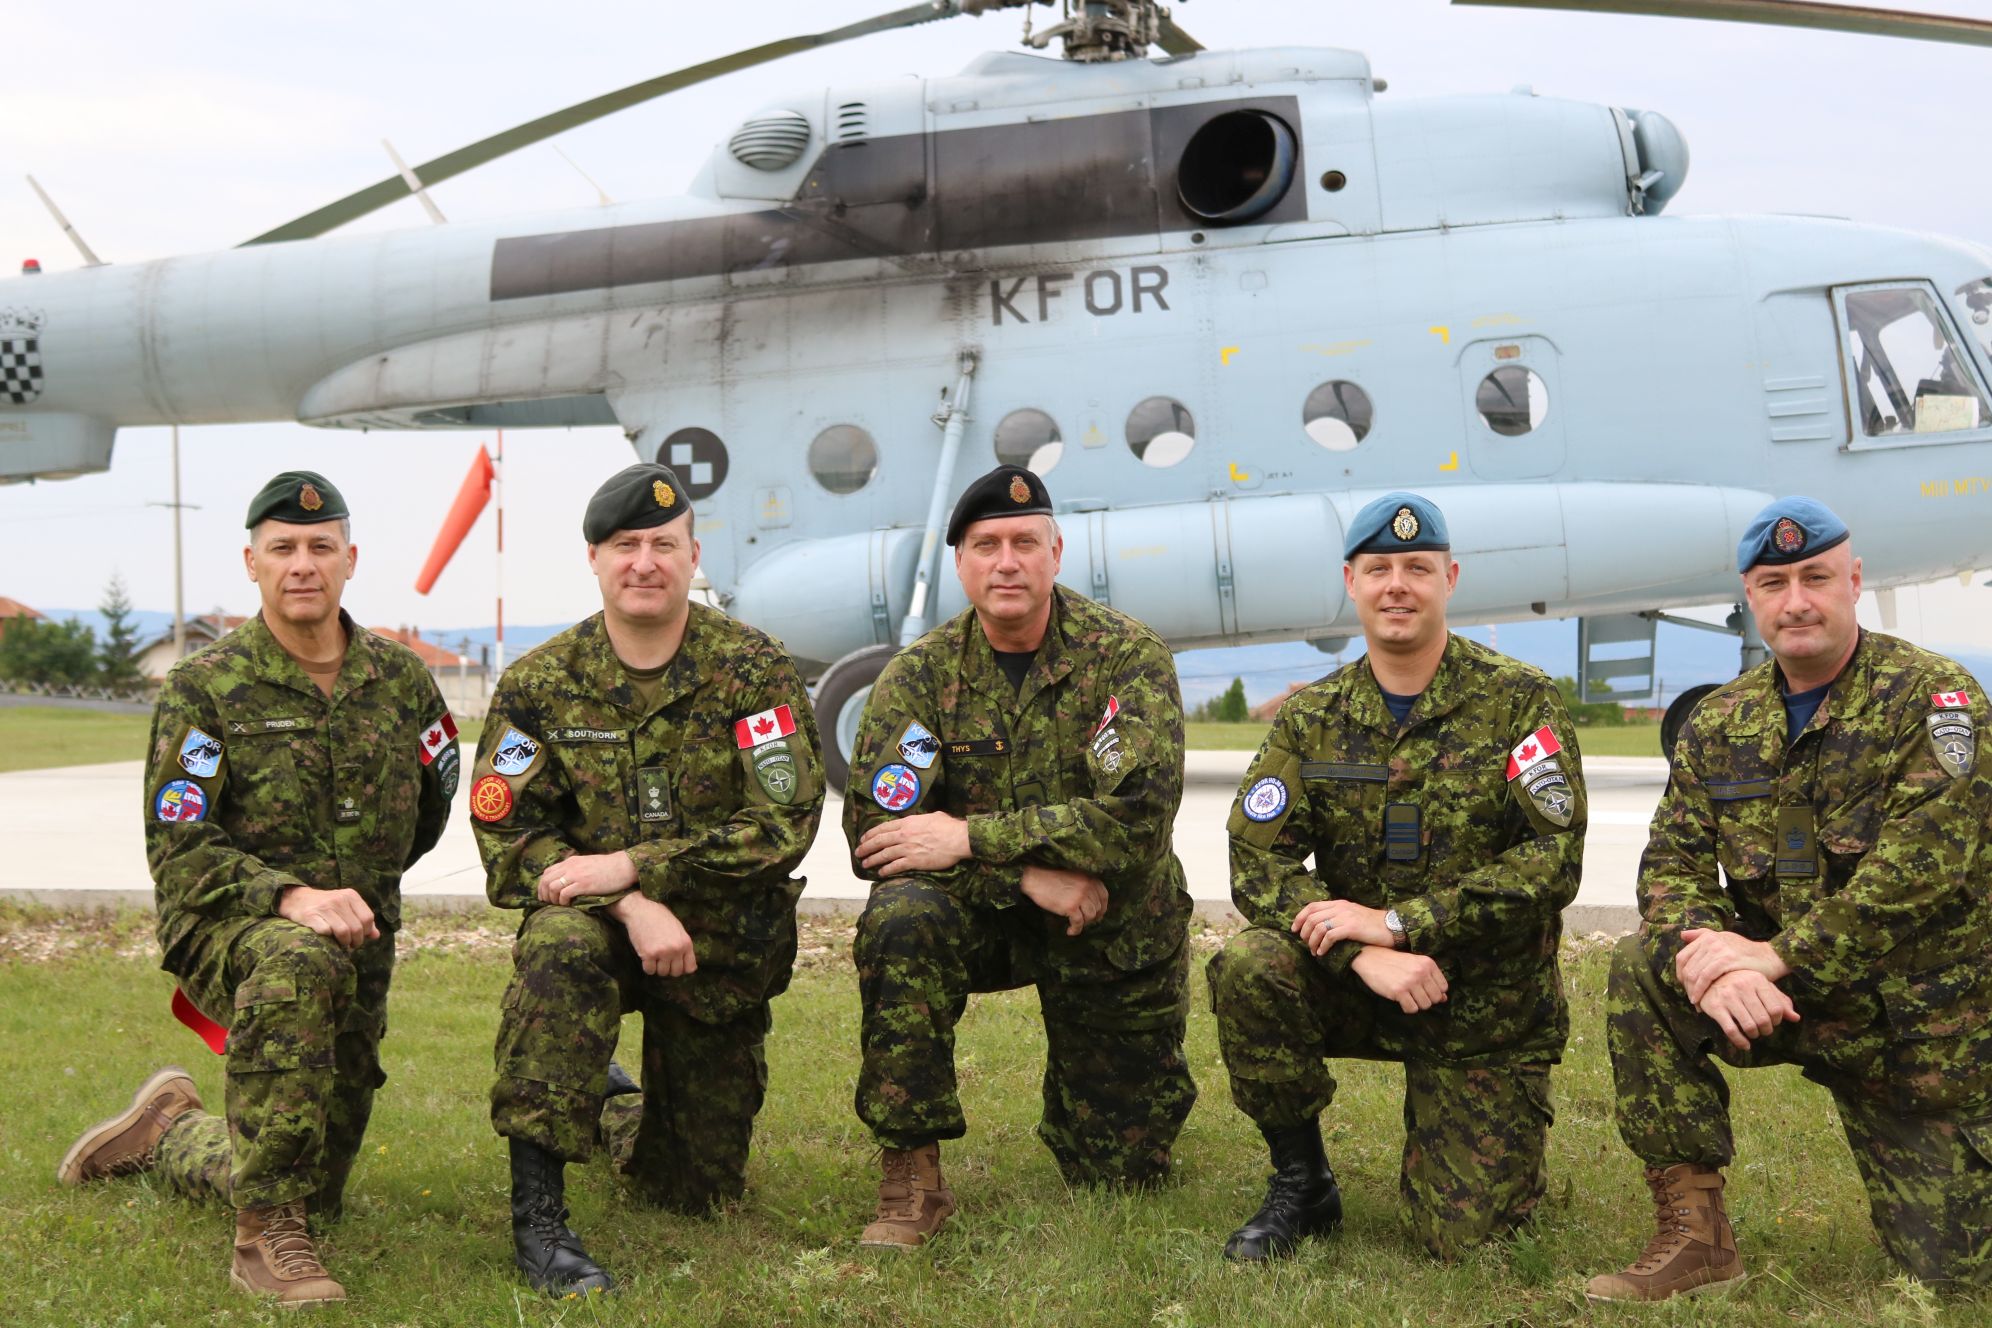 The Operation KOBOLD Task Force (from left to right: Major K. Pruden, Lieutenant-Colonel M. Southorn, Commander A. Thys, Major K. Hjalmarson, and Warrant Officer E. Martel) in 2018.